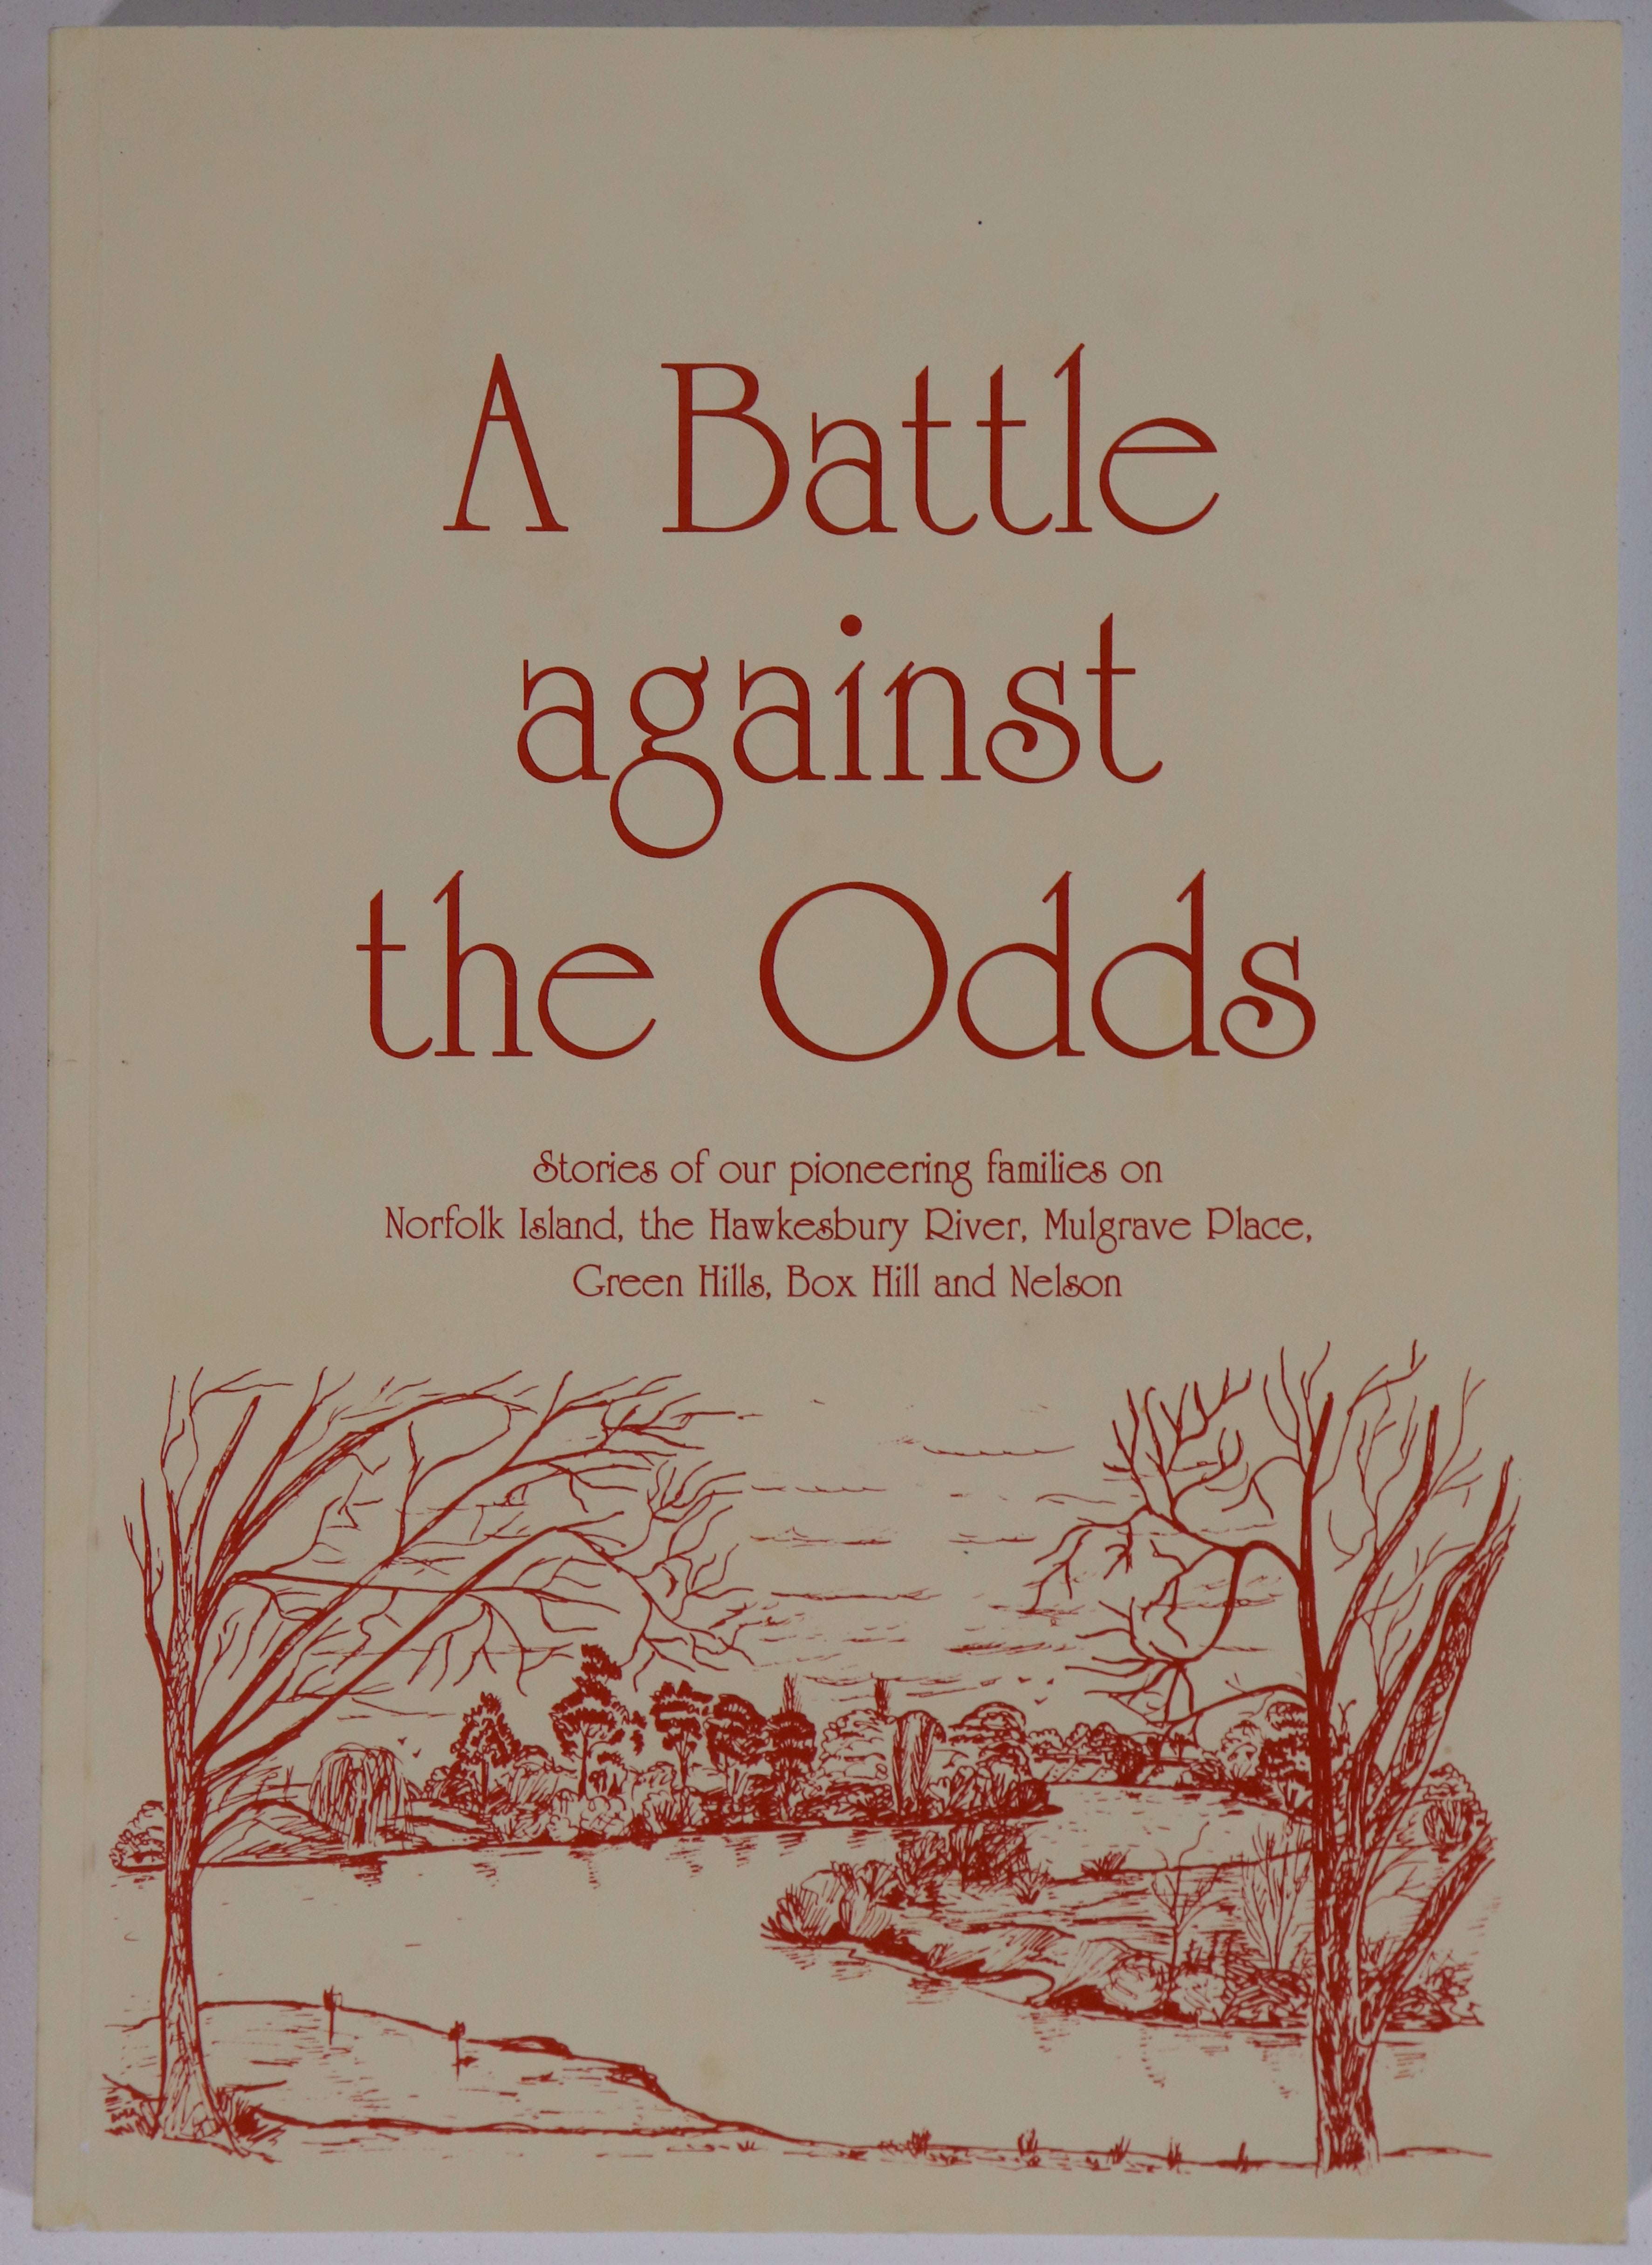 A Battle Against The Odds by AJ Brown - 1992 - Australian Colonial History Book